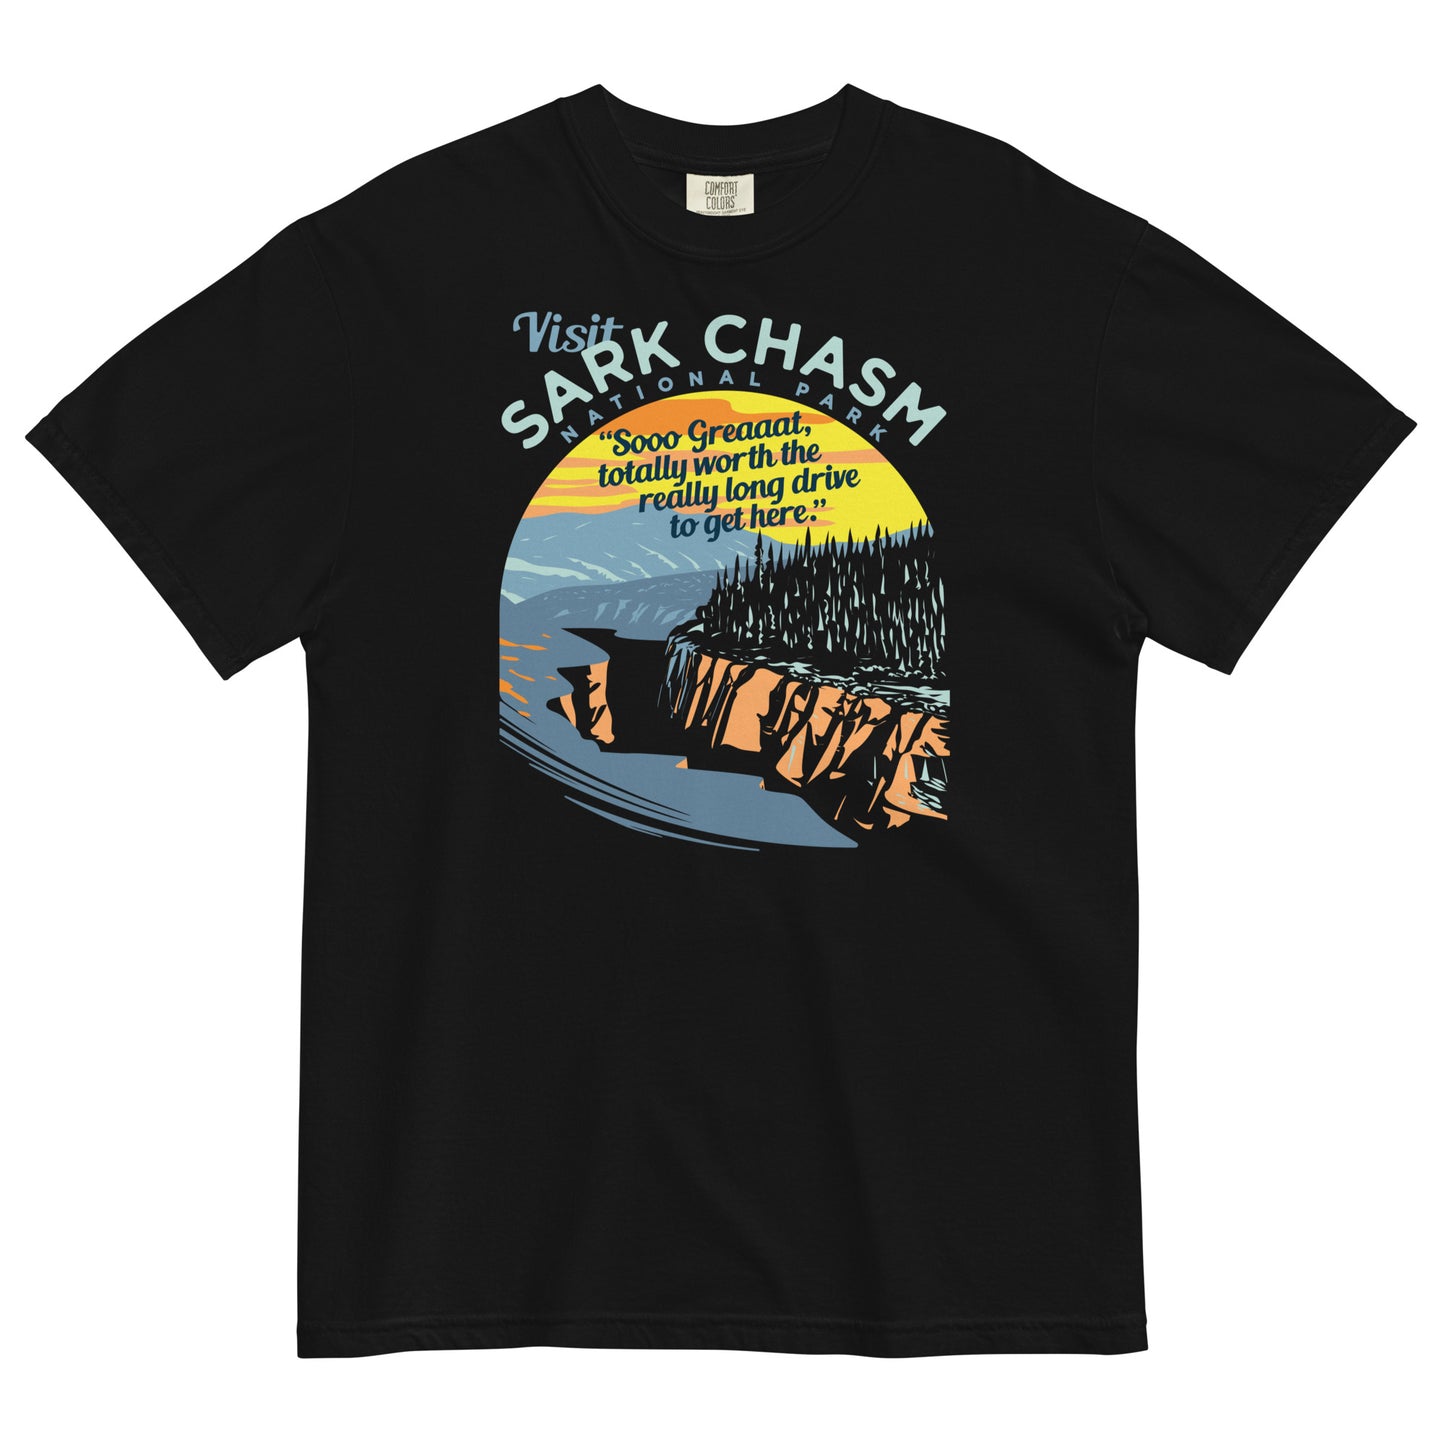 Visit Sark Chasm Men's Relaxed Fit Tee